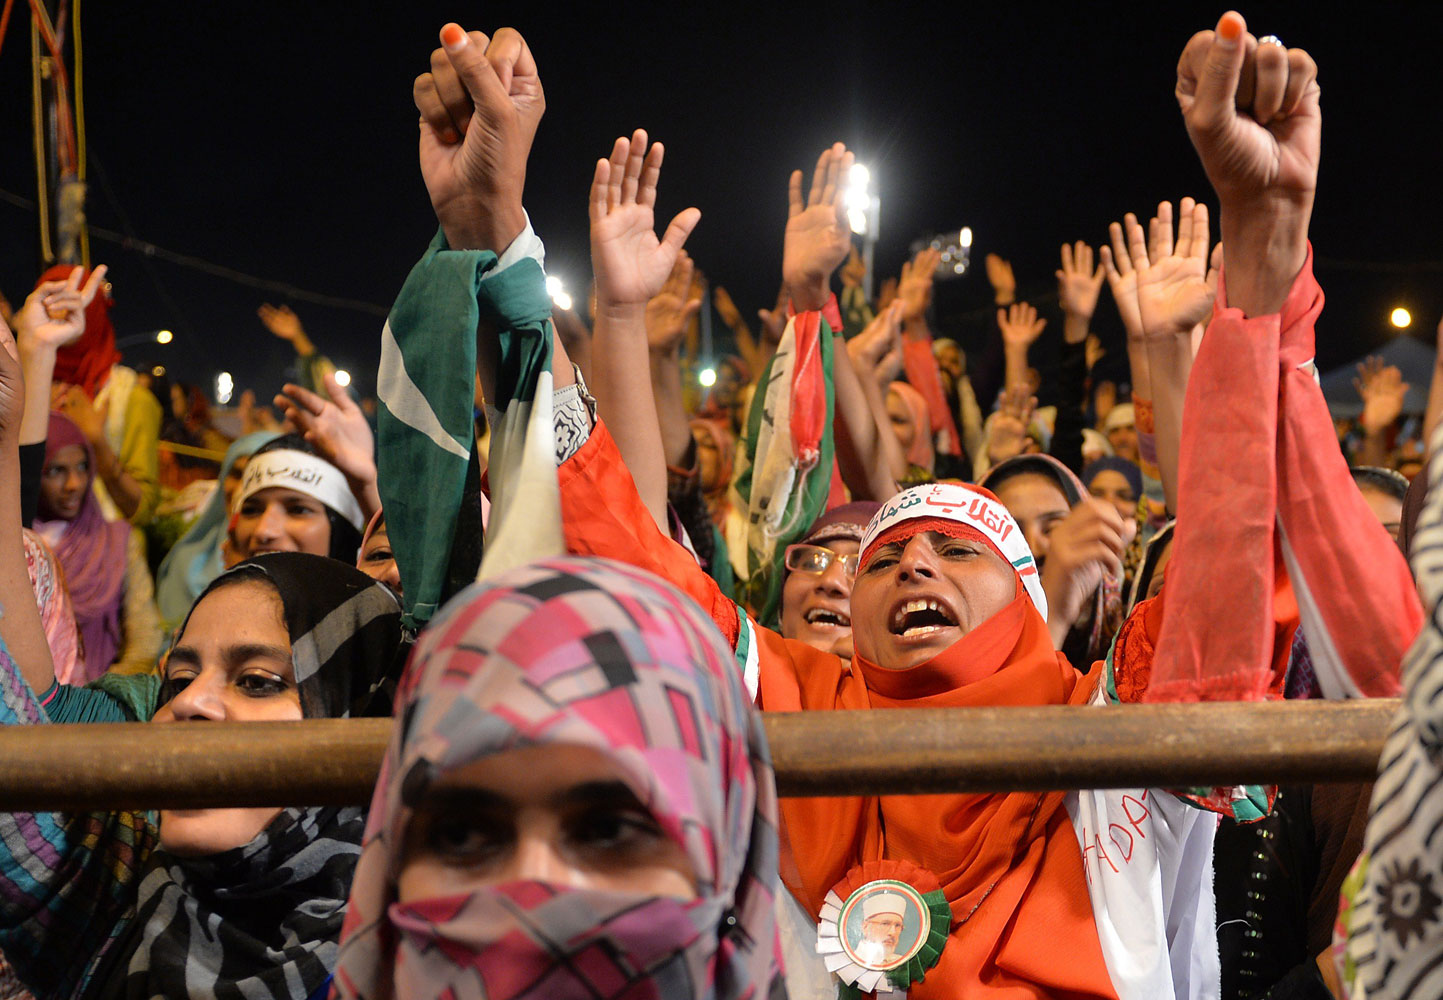 Pakistani supporters of Canada-based preacher Tahir-ul-Qadri shout anti-government slogans during a protest in front of the Parliament in Islamabad on Aug. 29, 2014. (Aamir Qureshi—AFP/Getty Images)